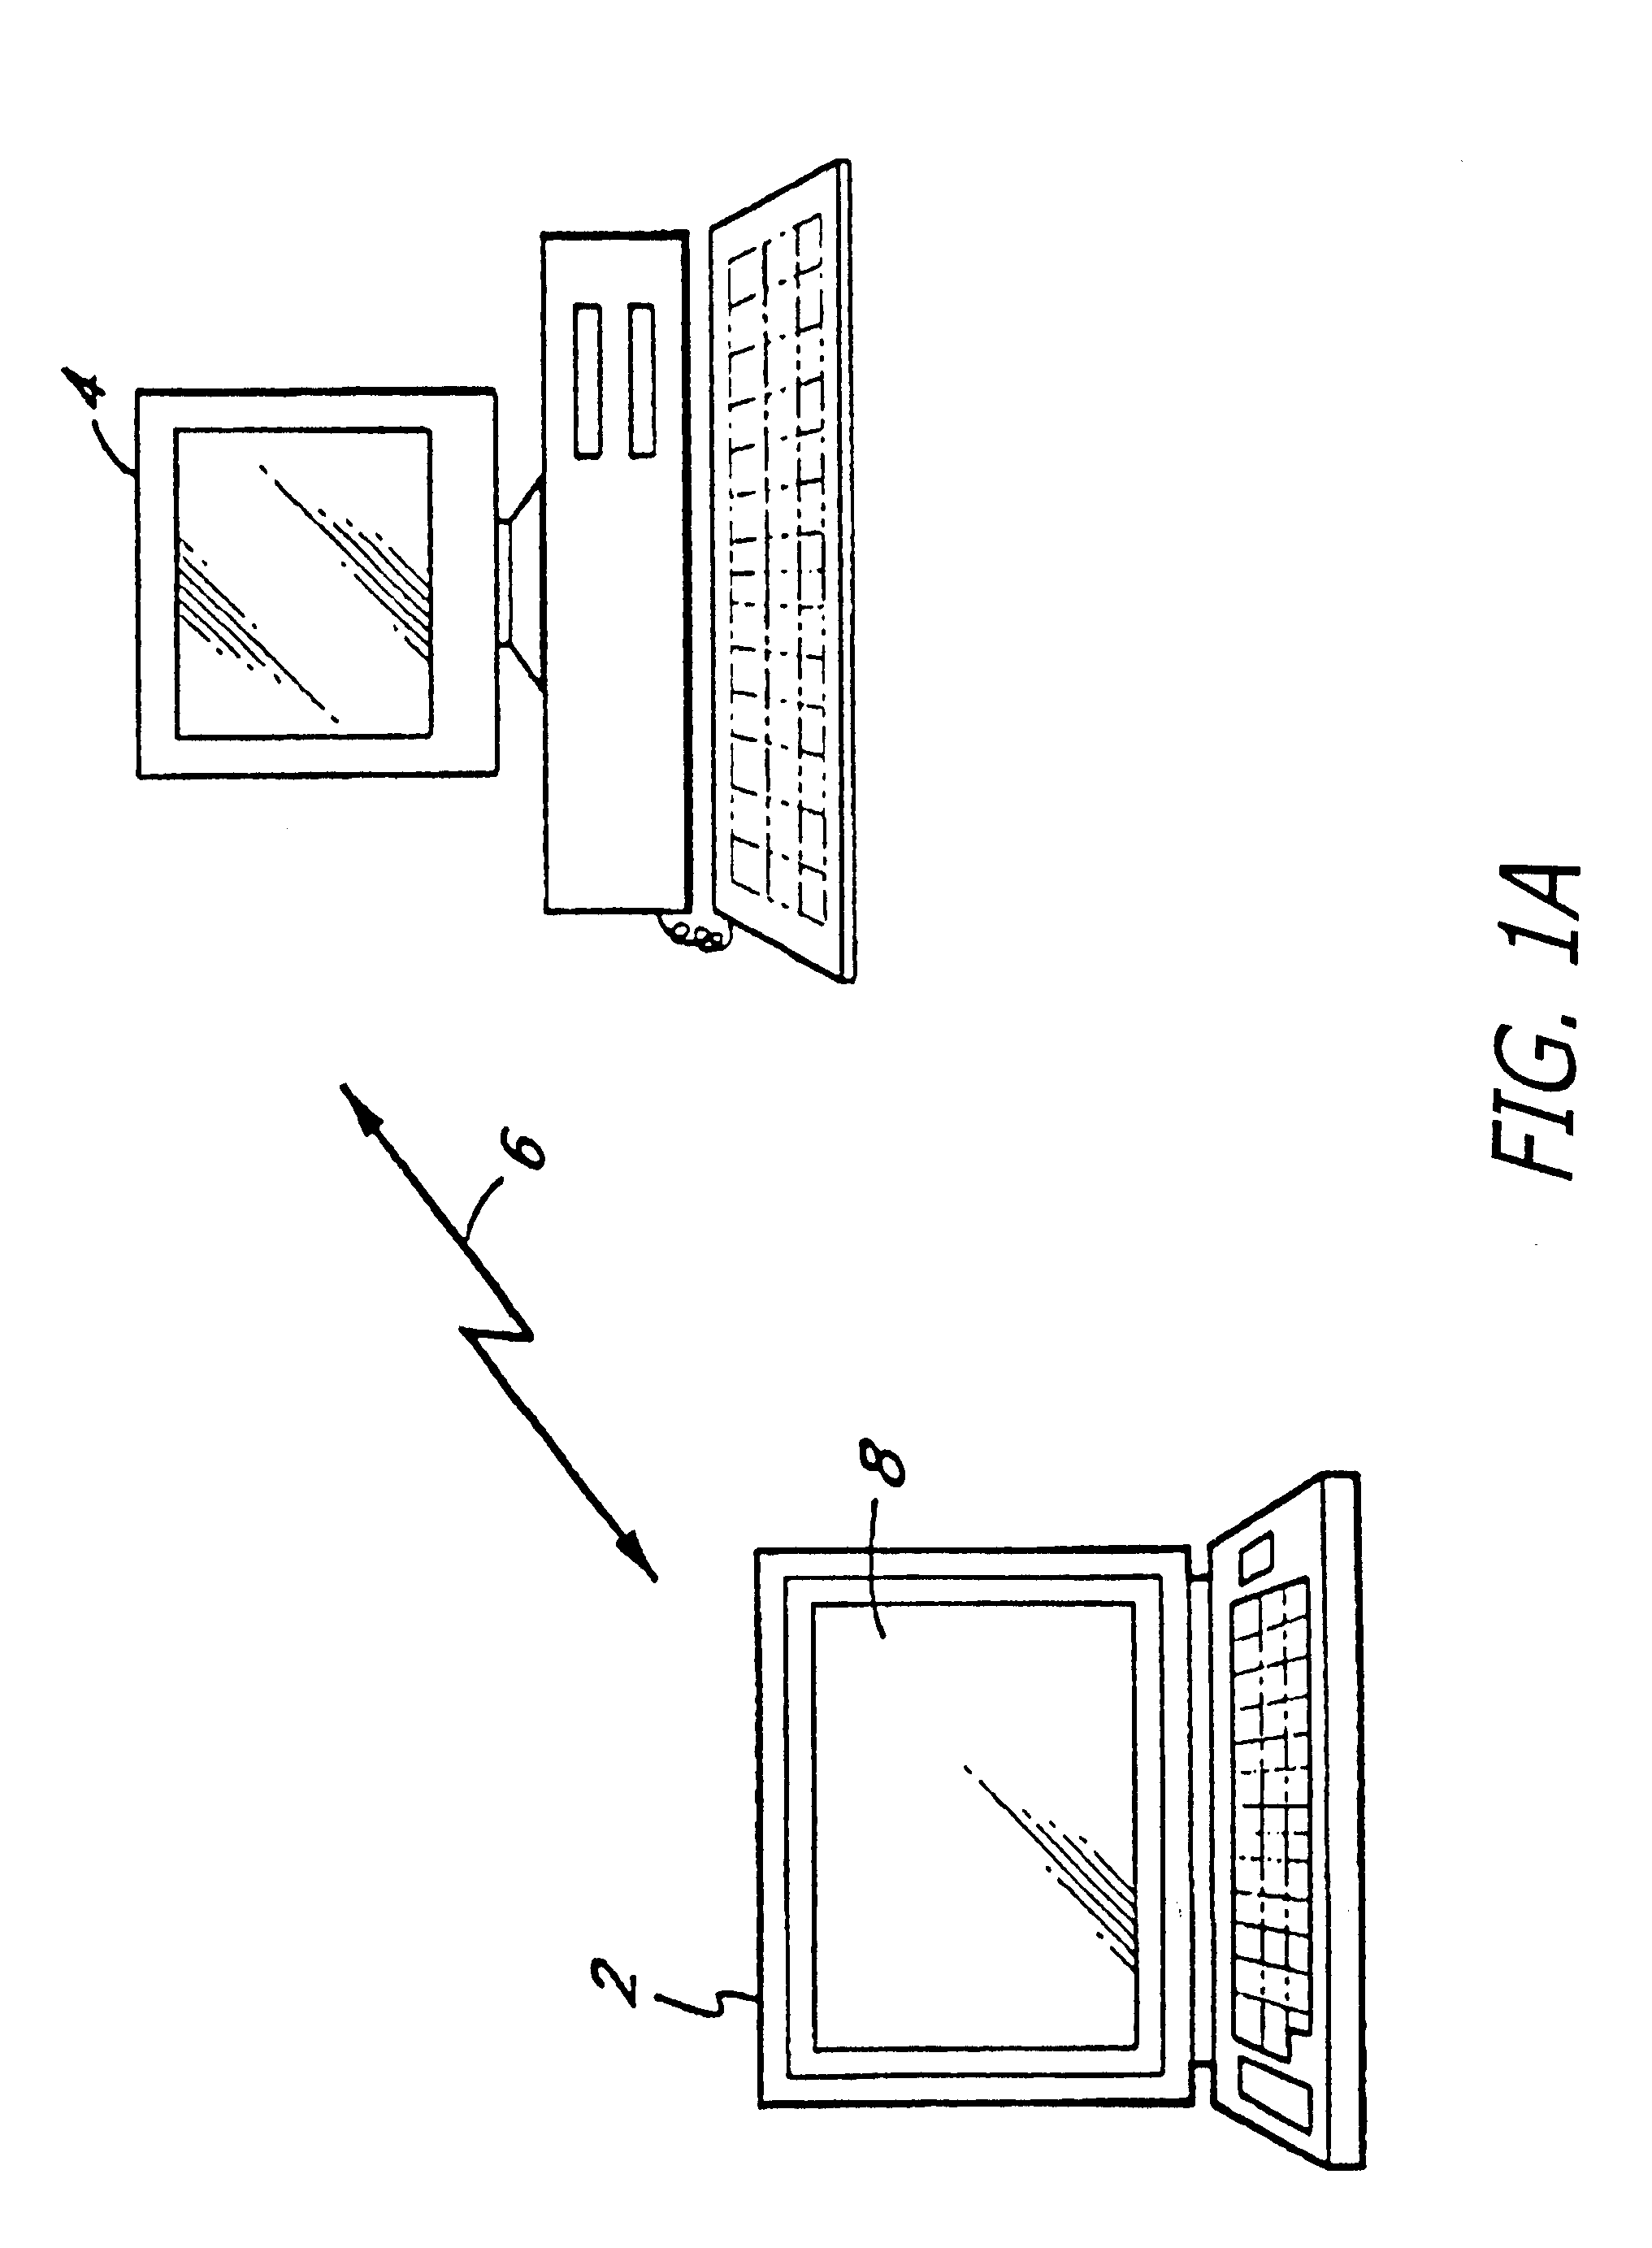 Method and apparatus for providing remote access, control of remote systems and updating of display information